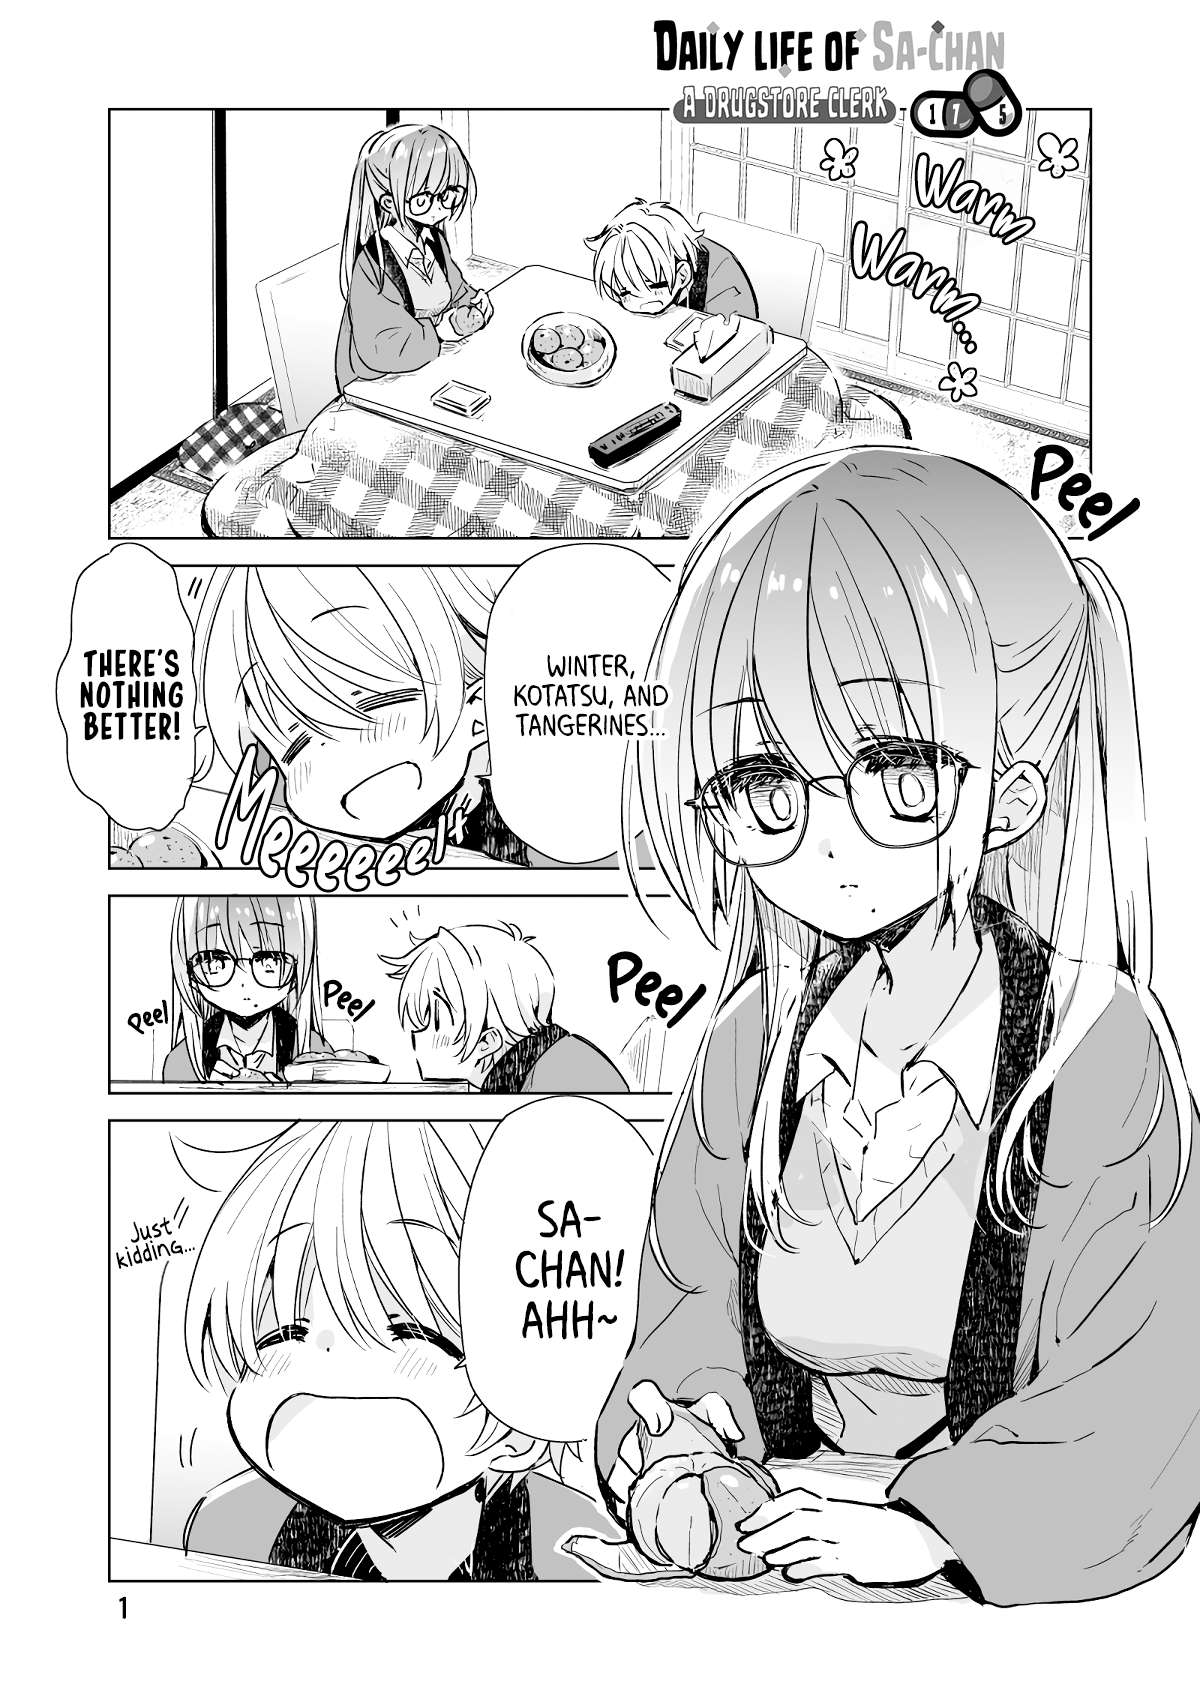 Daily Life Of Sa-Chan, A Drugstore Clerk - chapter 17.5 - #1